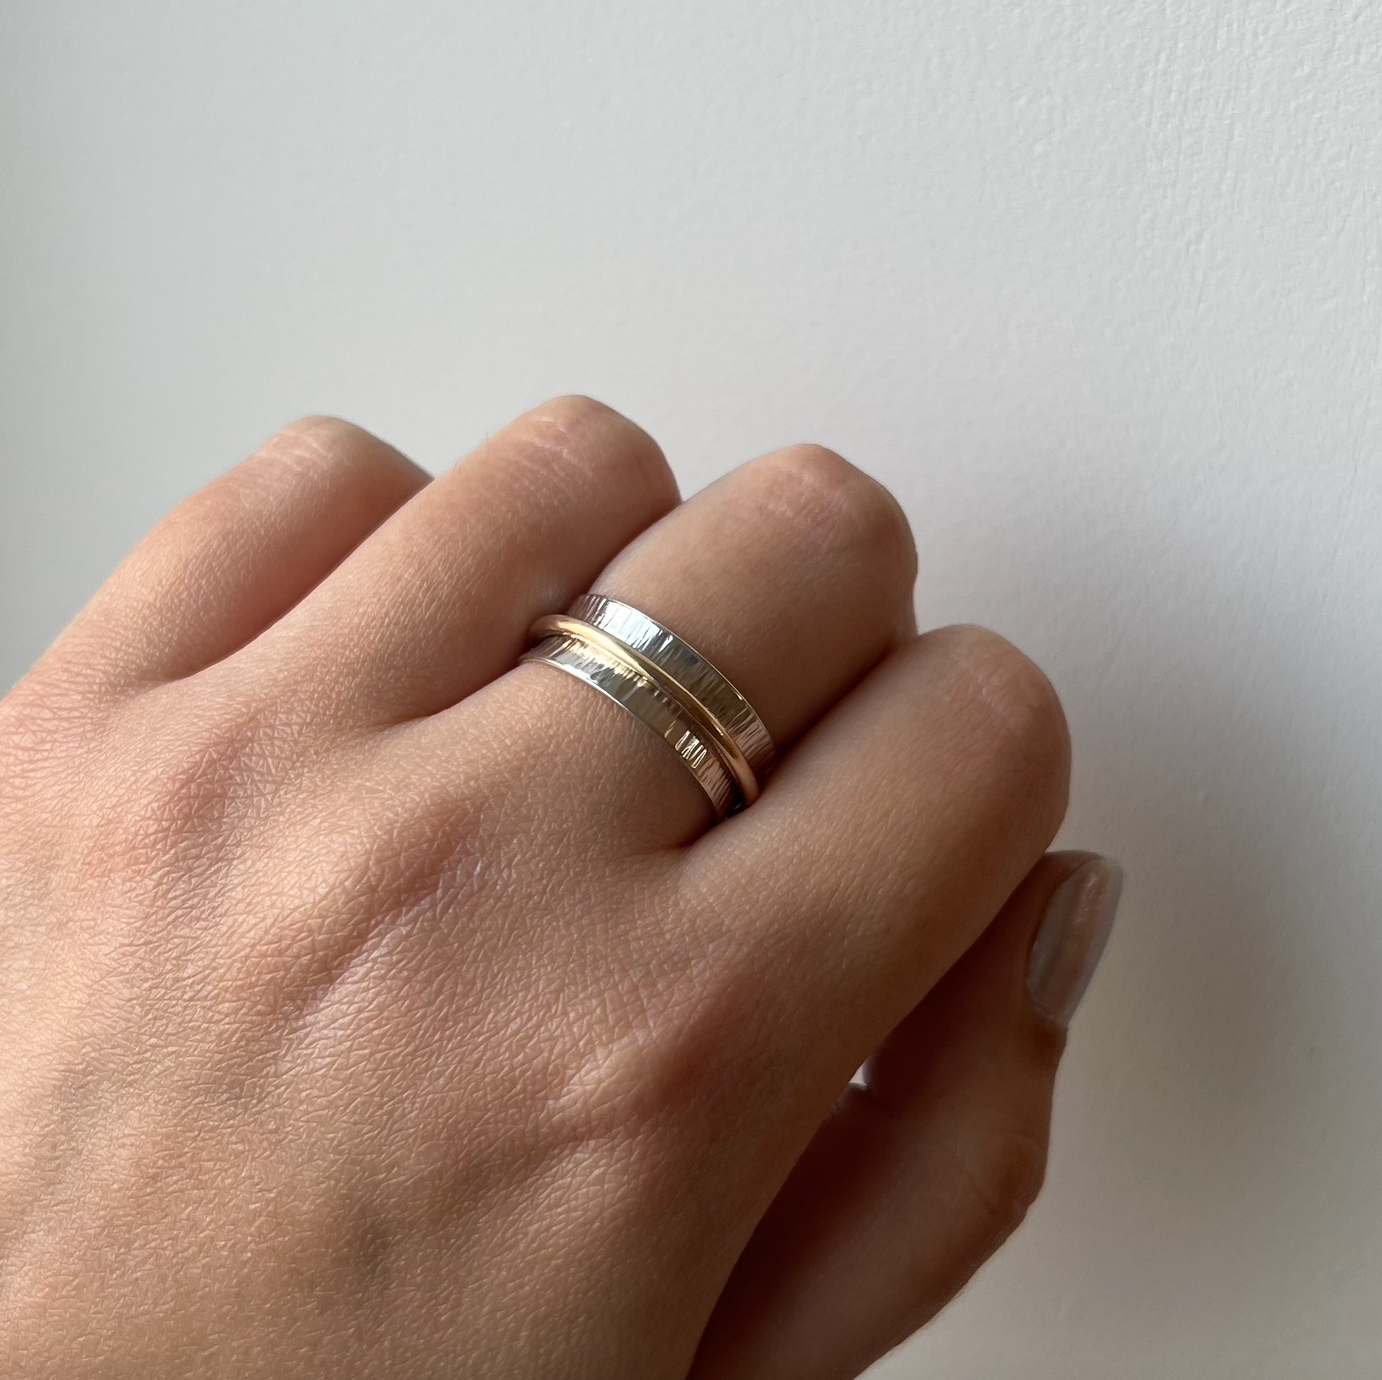 A sterling silver spinner ring with one gold band.